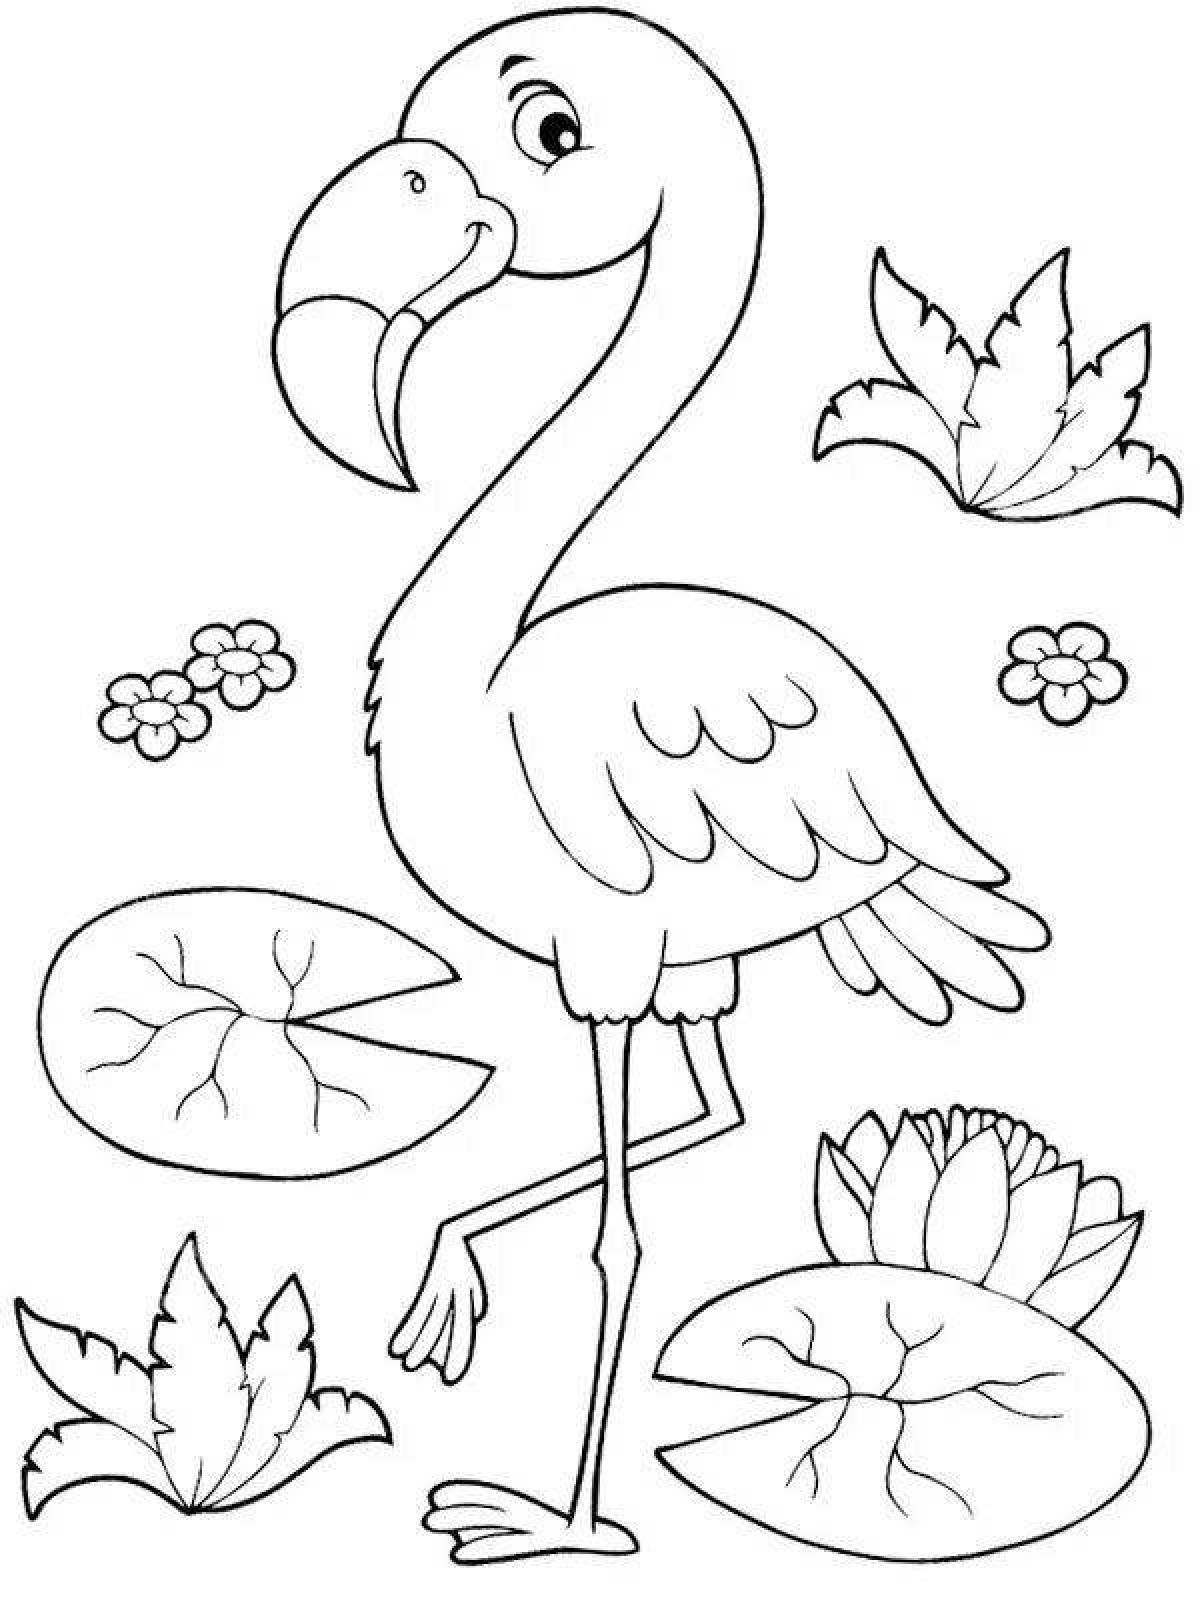 Fancy pink flamingo coloring page